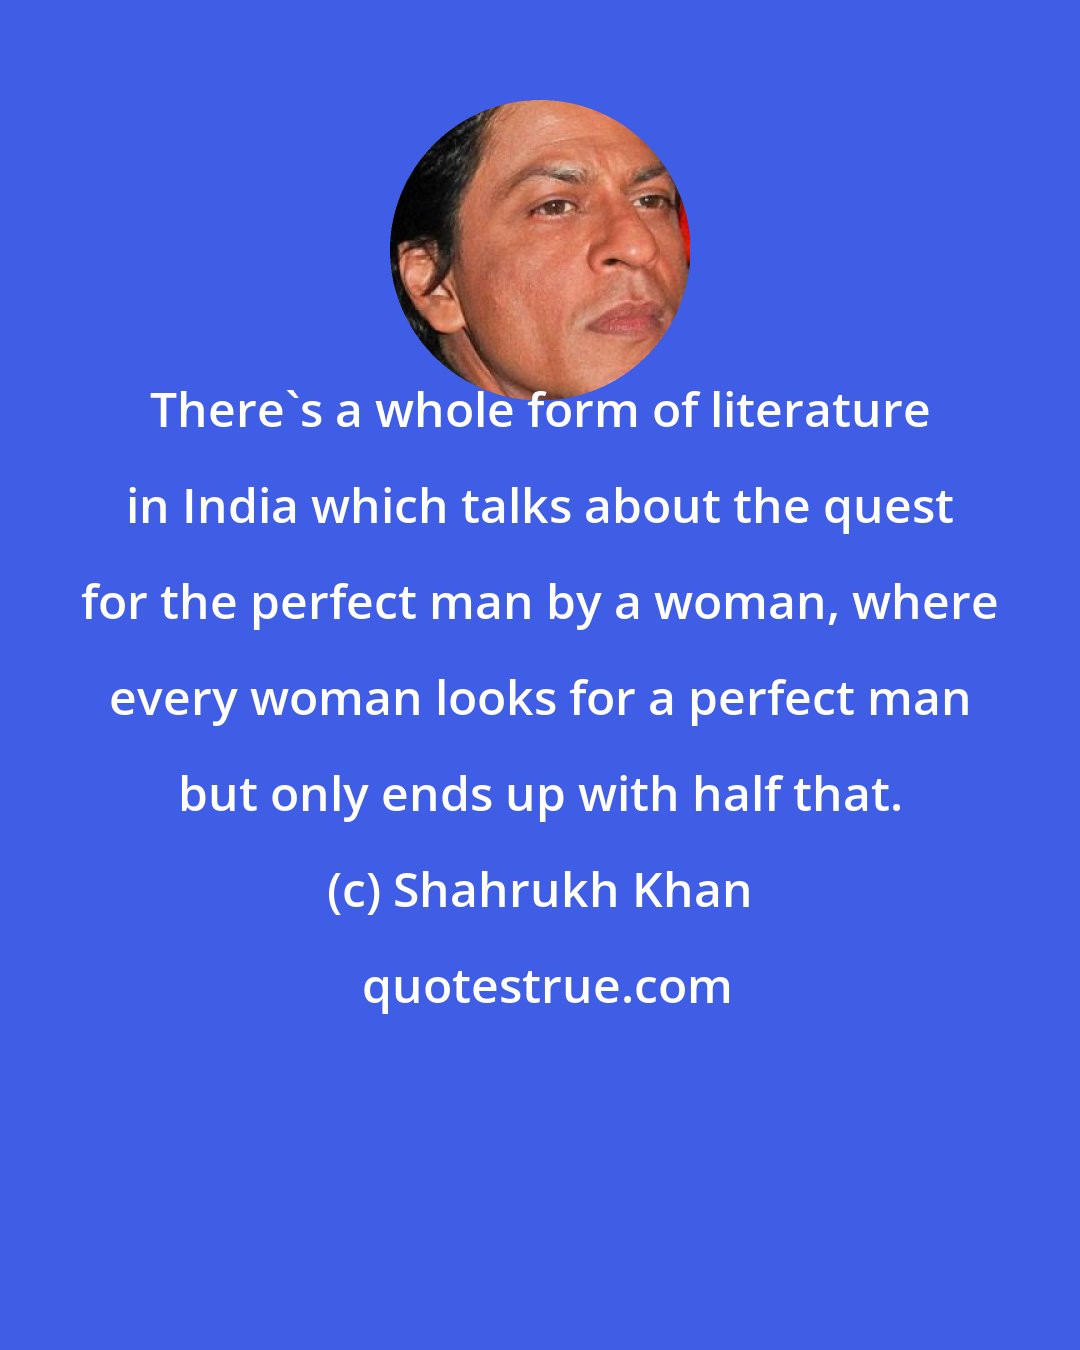 Shahrukh Khan: There's a whole form of literature in India which talks about the quest for the perfect man by a woman, where every woman looks for a perfect man but only ends up with half that.